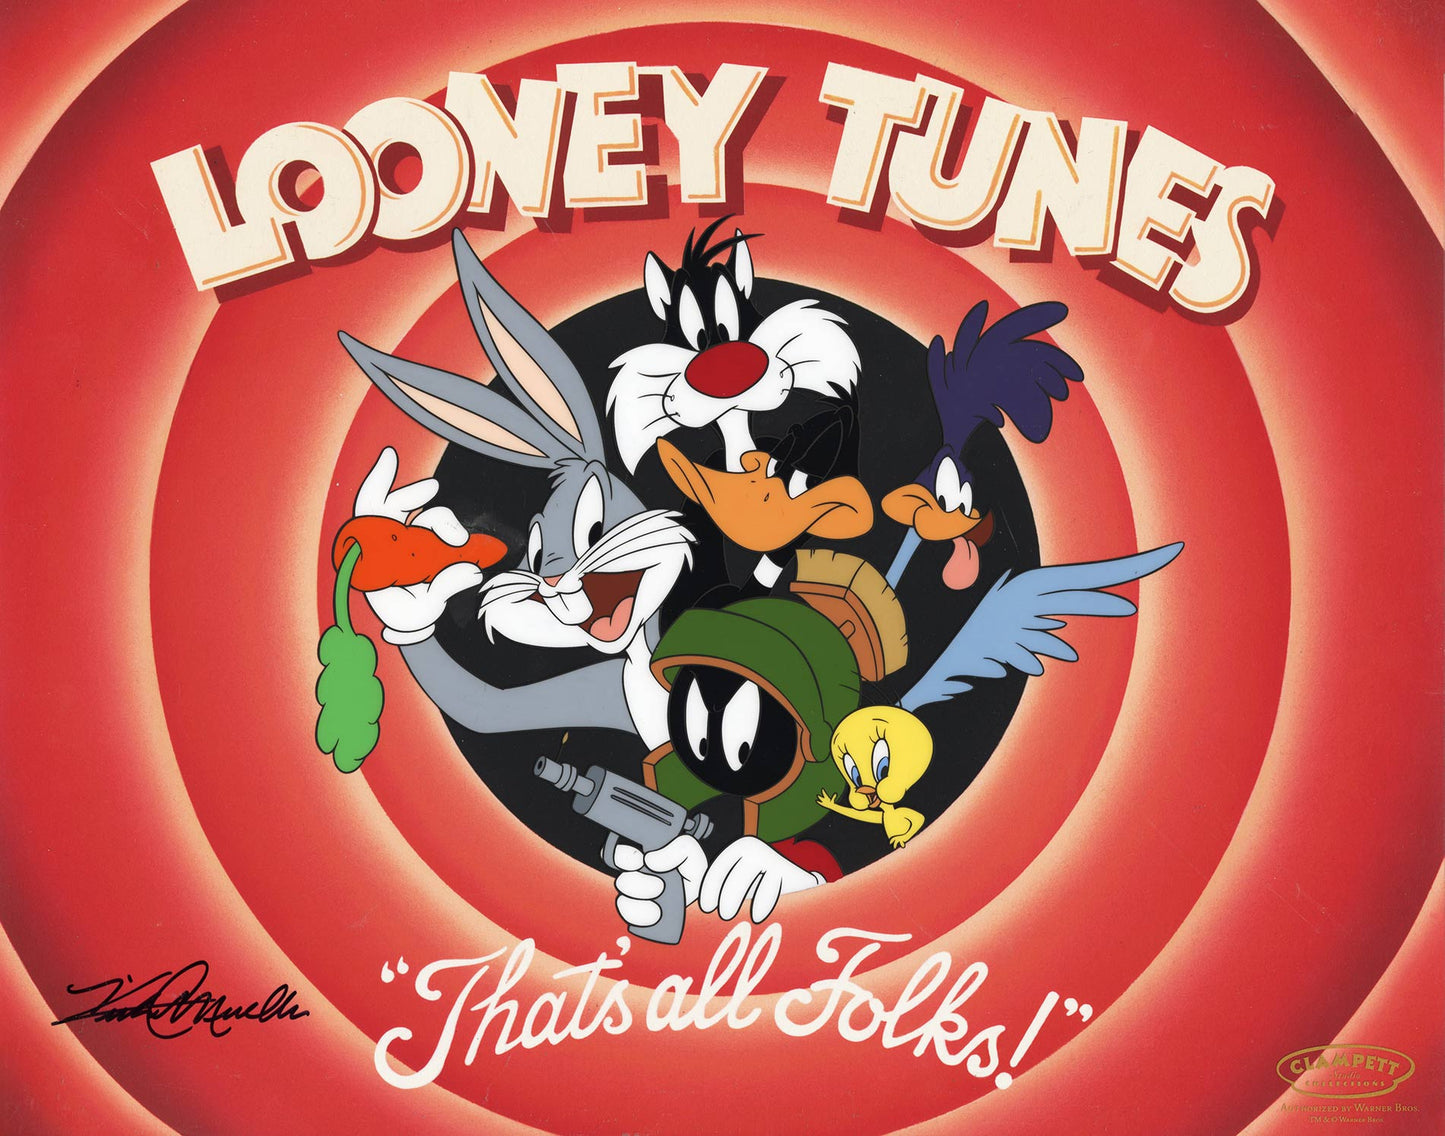 Looney Tunes Warner Brothers Limited Edition Animation Cel of 50 Signed by Kirk Mueller "That's All Folks"